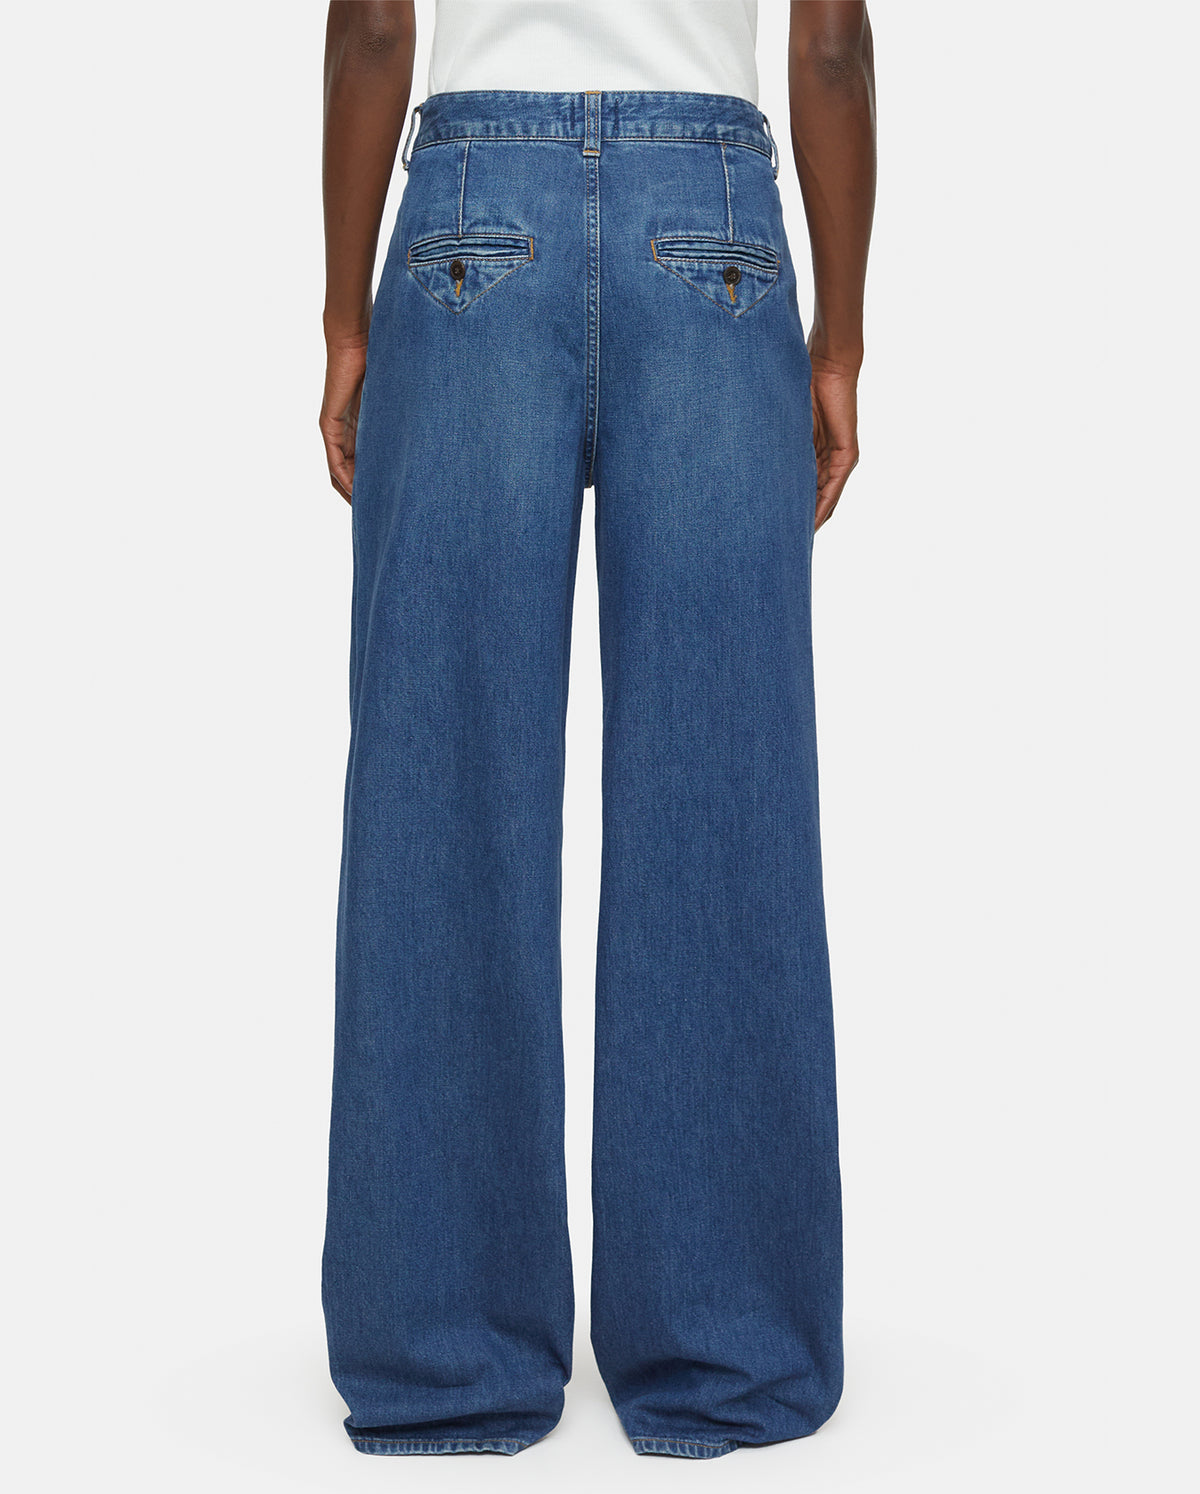 Jurdy Relaxed Straight Leg Jeans